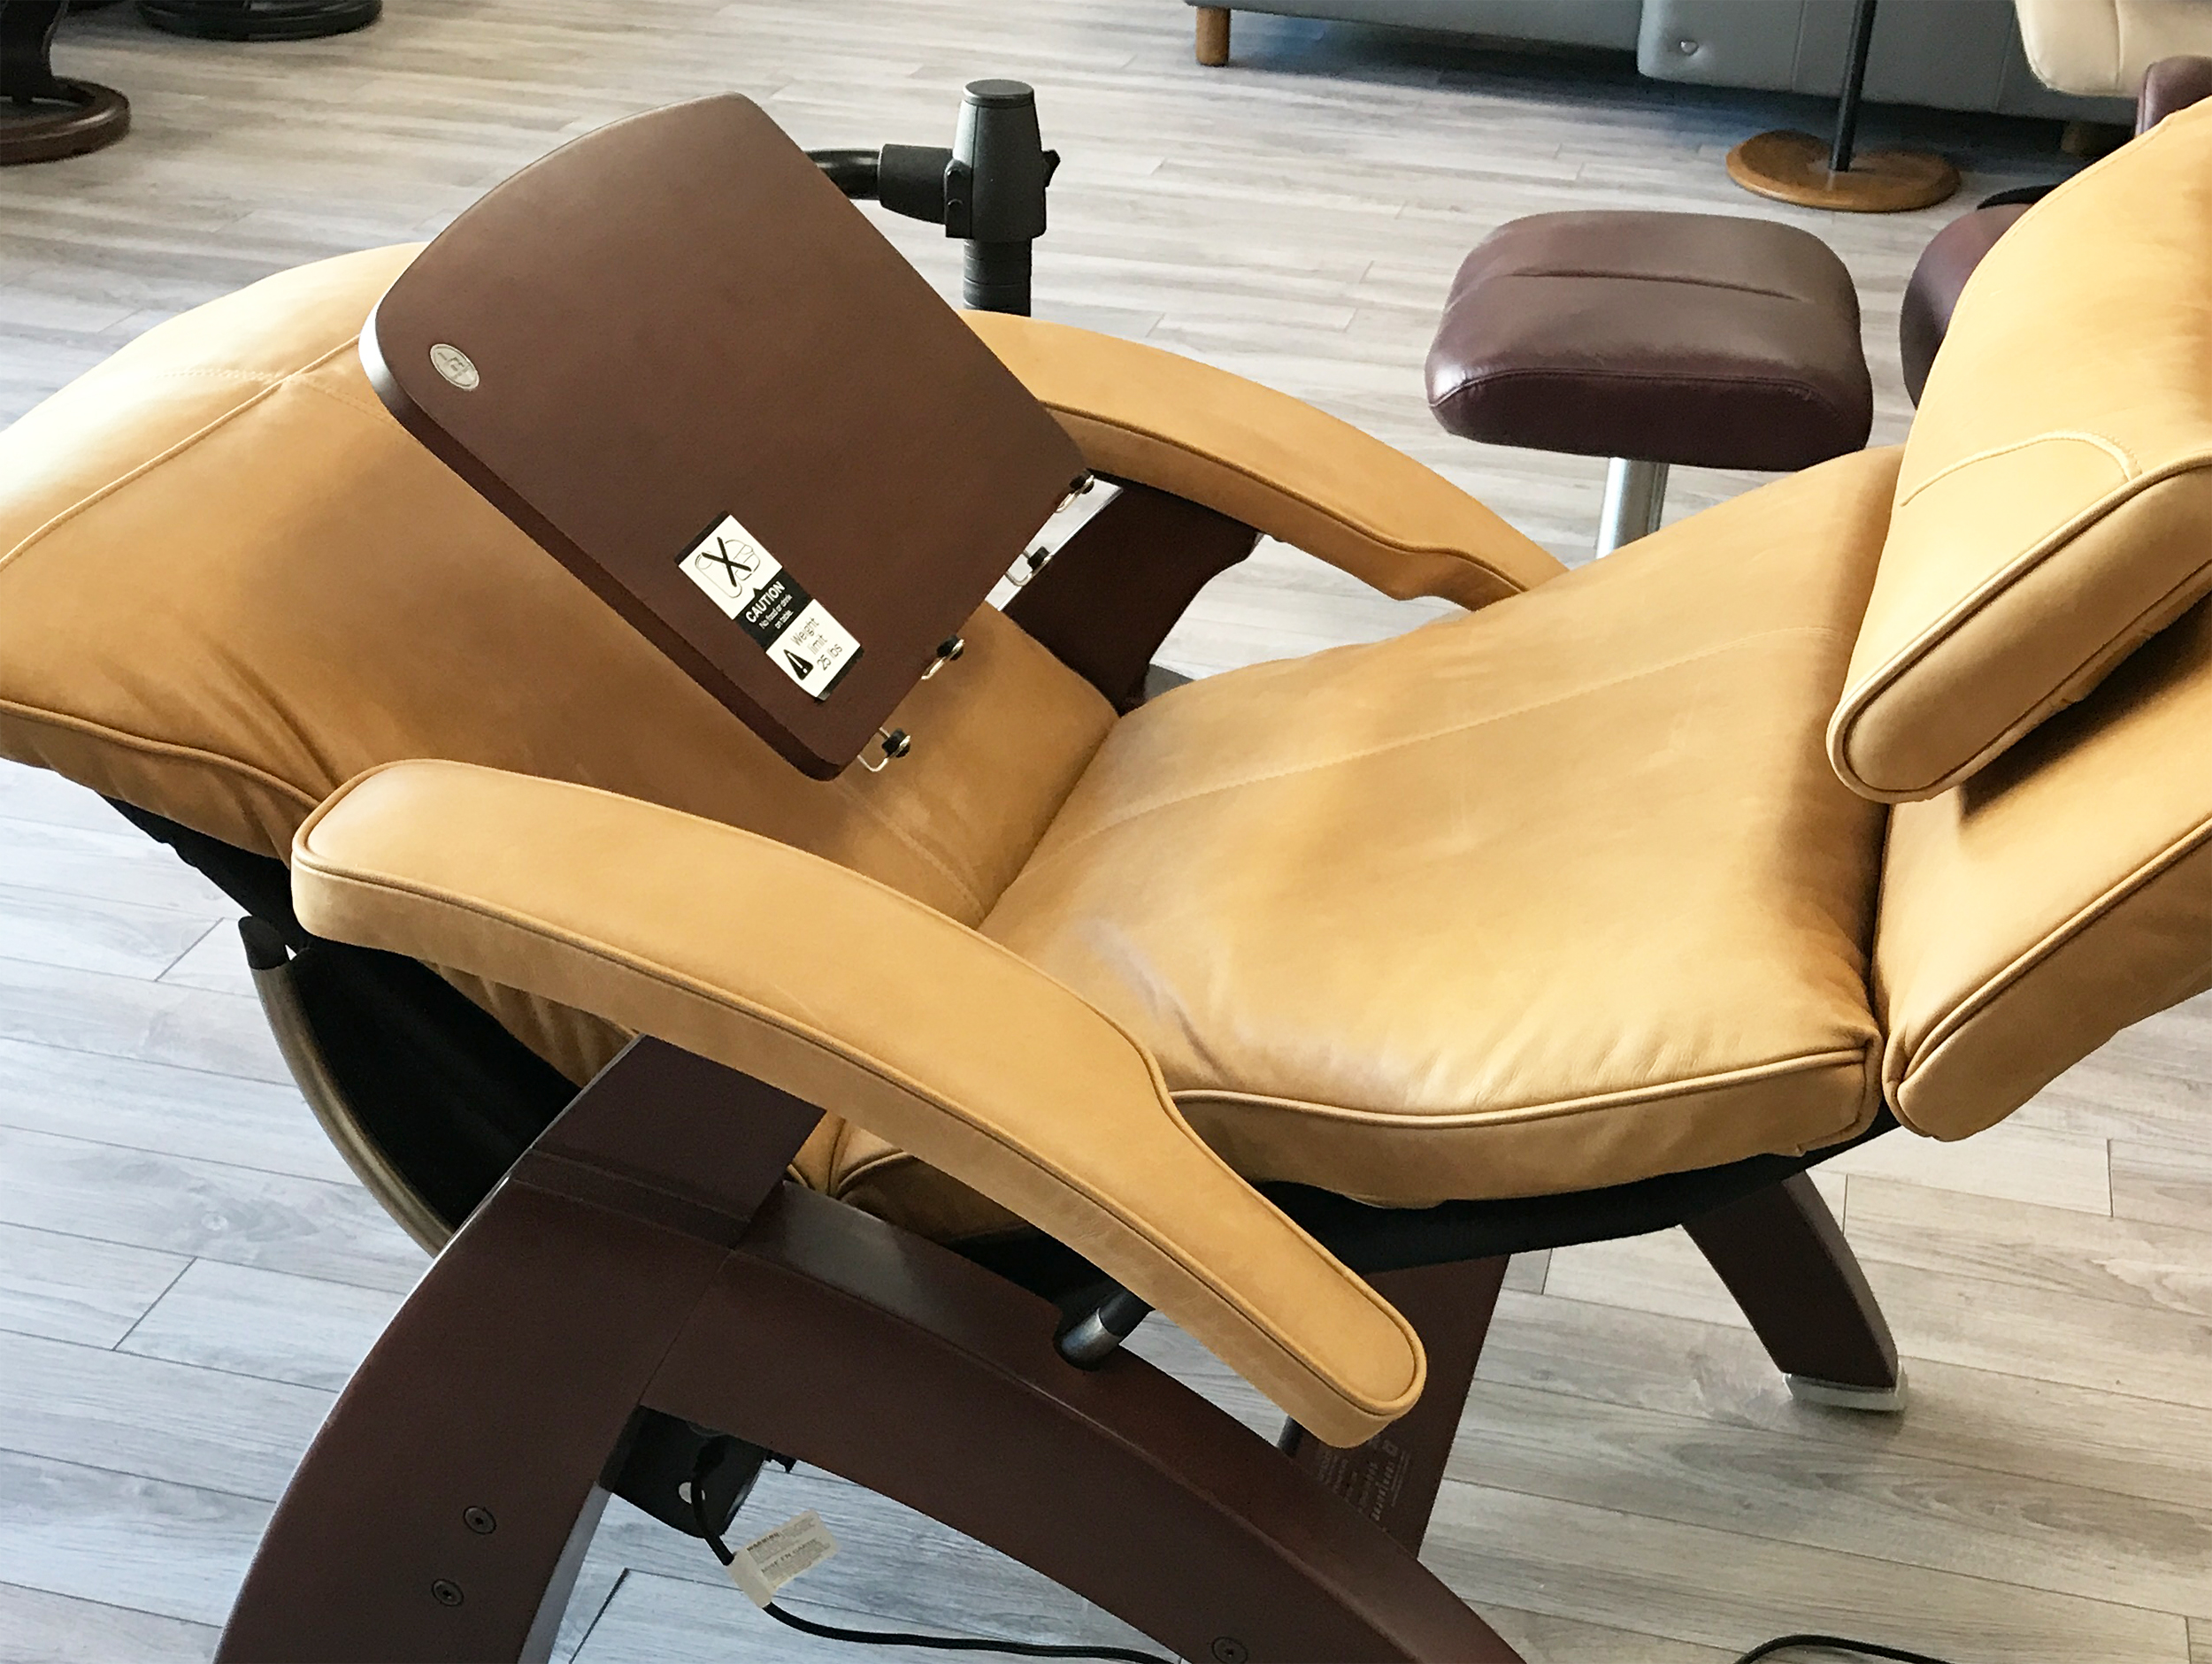 https://vitalityweb.com/backstore/HumanTouch/pics/Human-Touch-PC-610-Omni-Motion-Perfect-Chair-Recliner-Sycamore-Leather-5.jpg